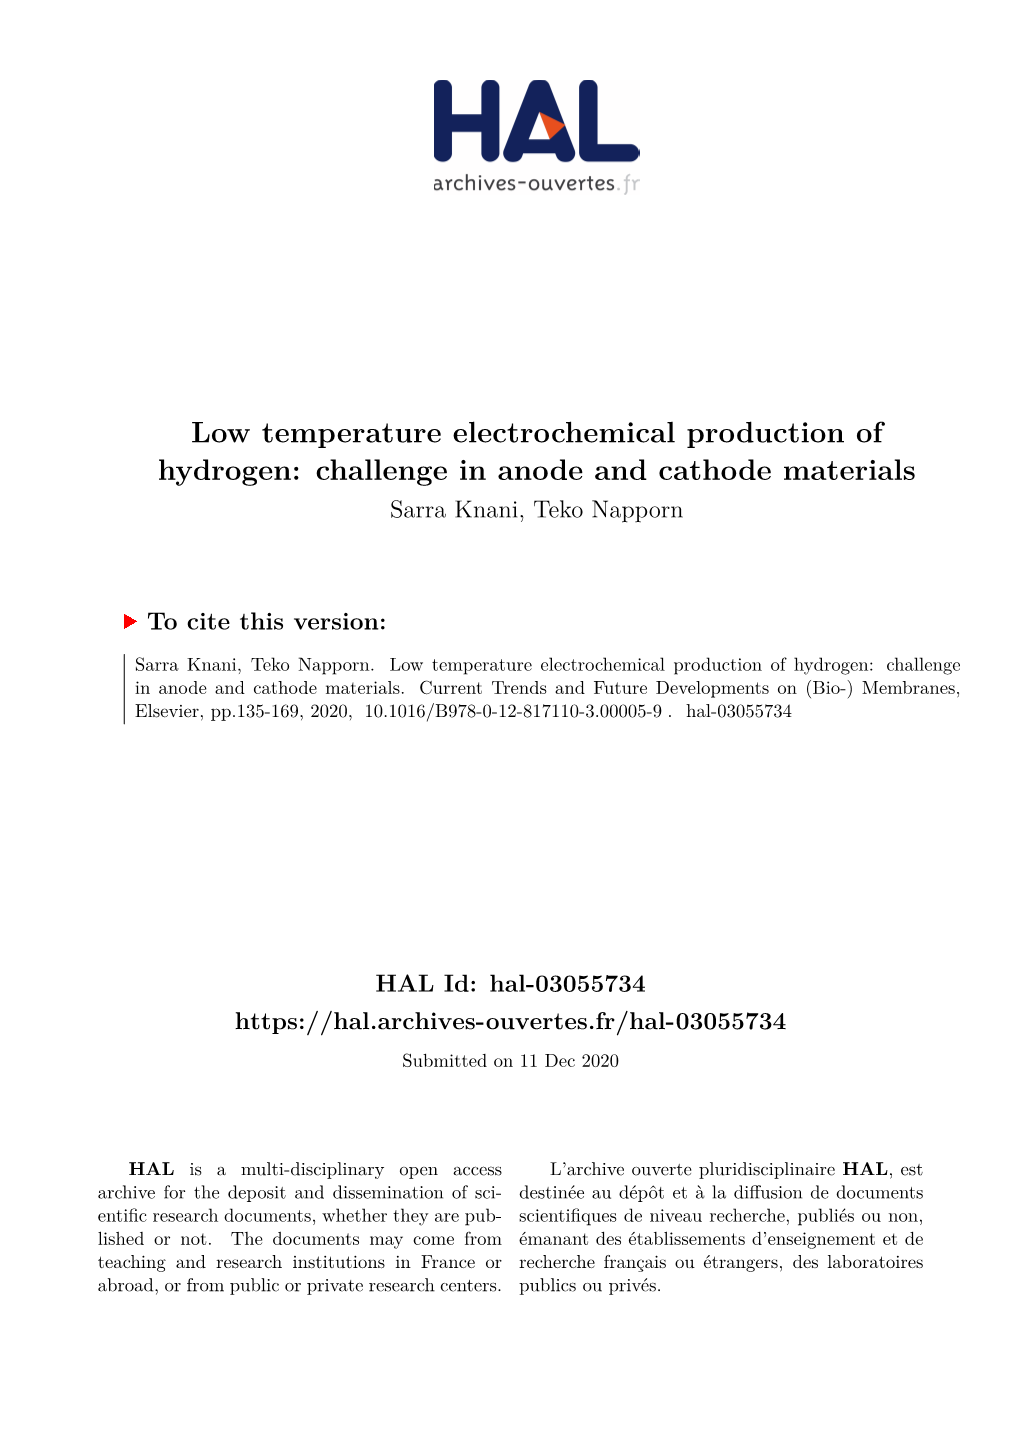 Low Temperature Electrochemical Production of Hydrogen: Challenge in Anode and Cathode Materials Sarra Knani, Teko Napporn